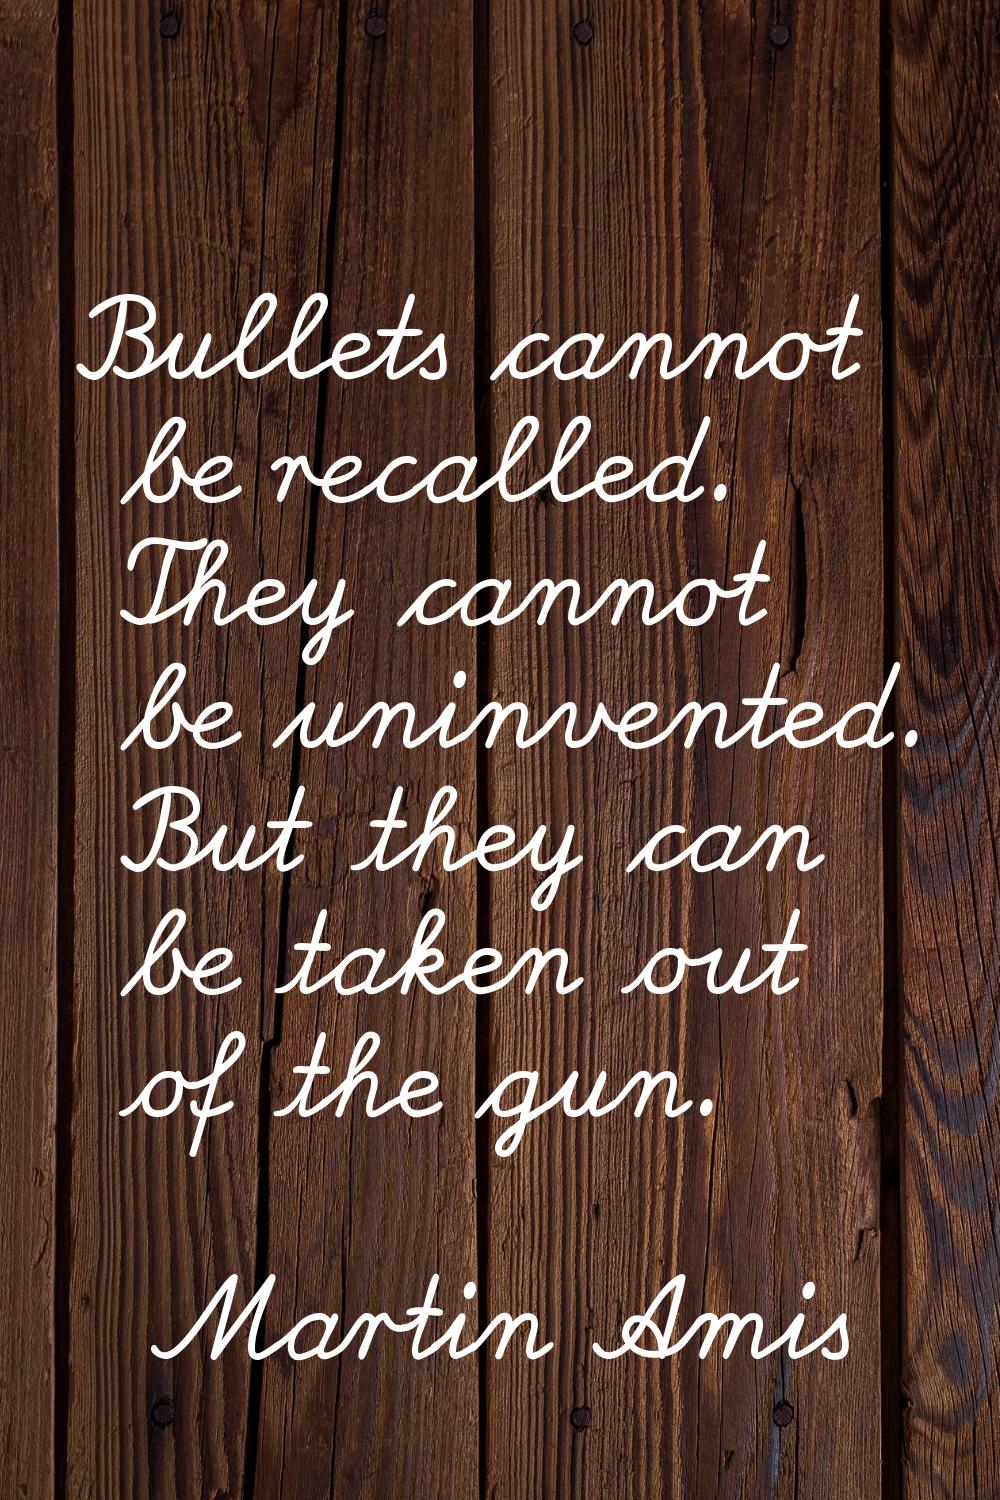 Bullets cannot be recalled. They cannot be uninvented. But they can be taken out of the gun.